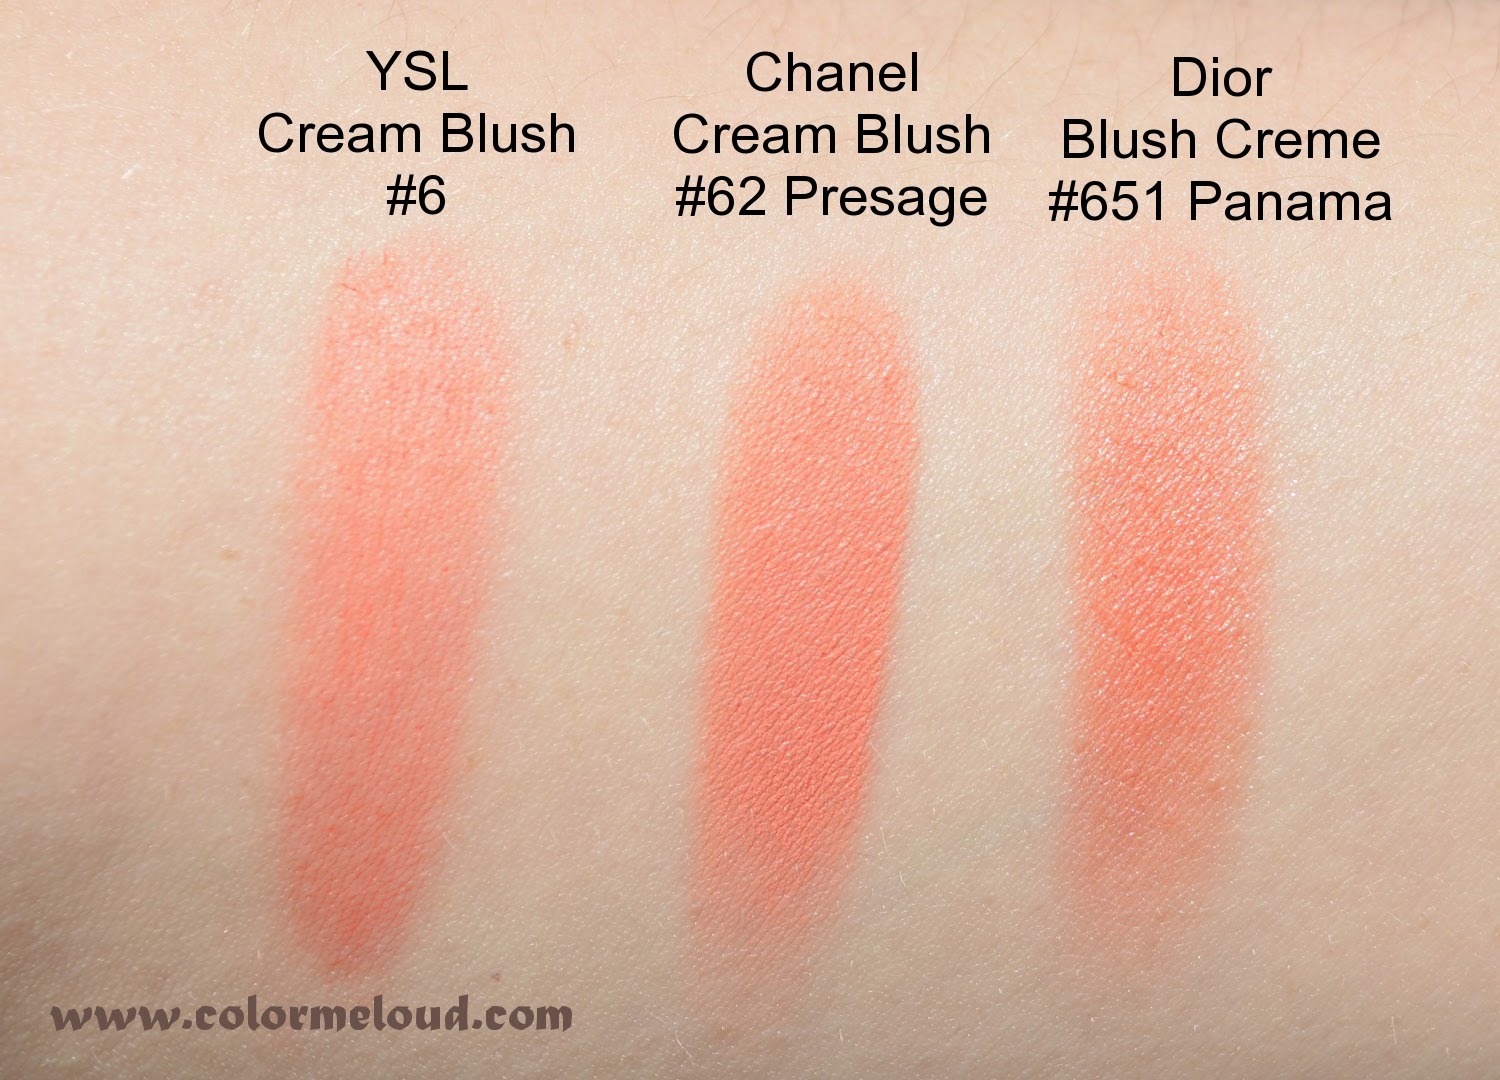 Chanel #62 Le Blush Creme de Chanel from Superstition Collection for Fall 2013 | Color Me Loud